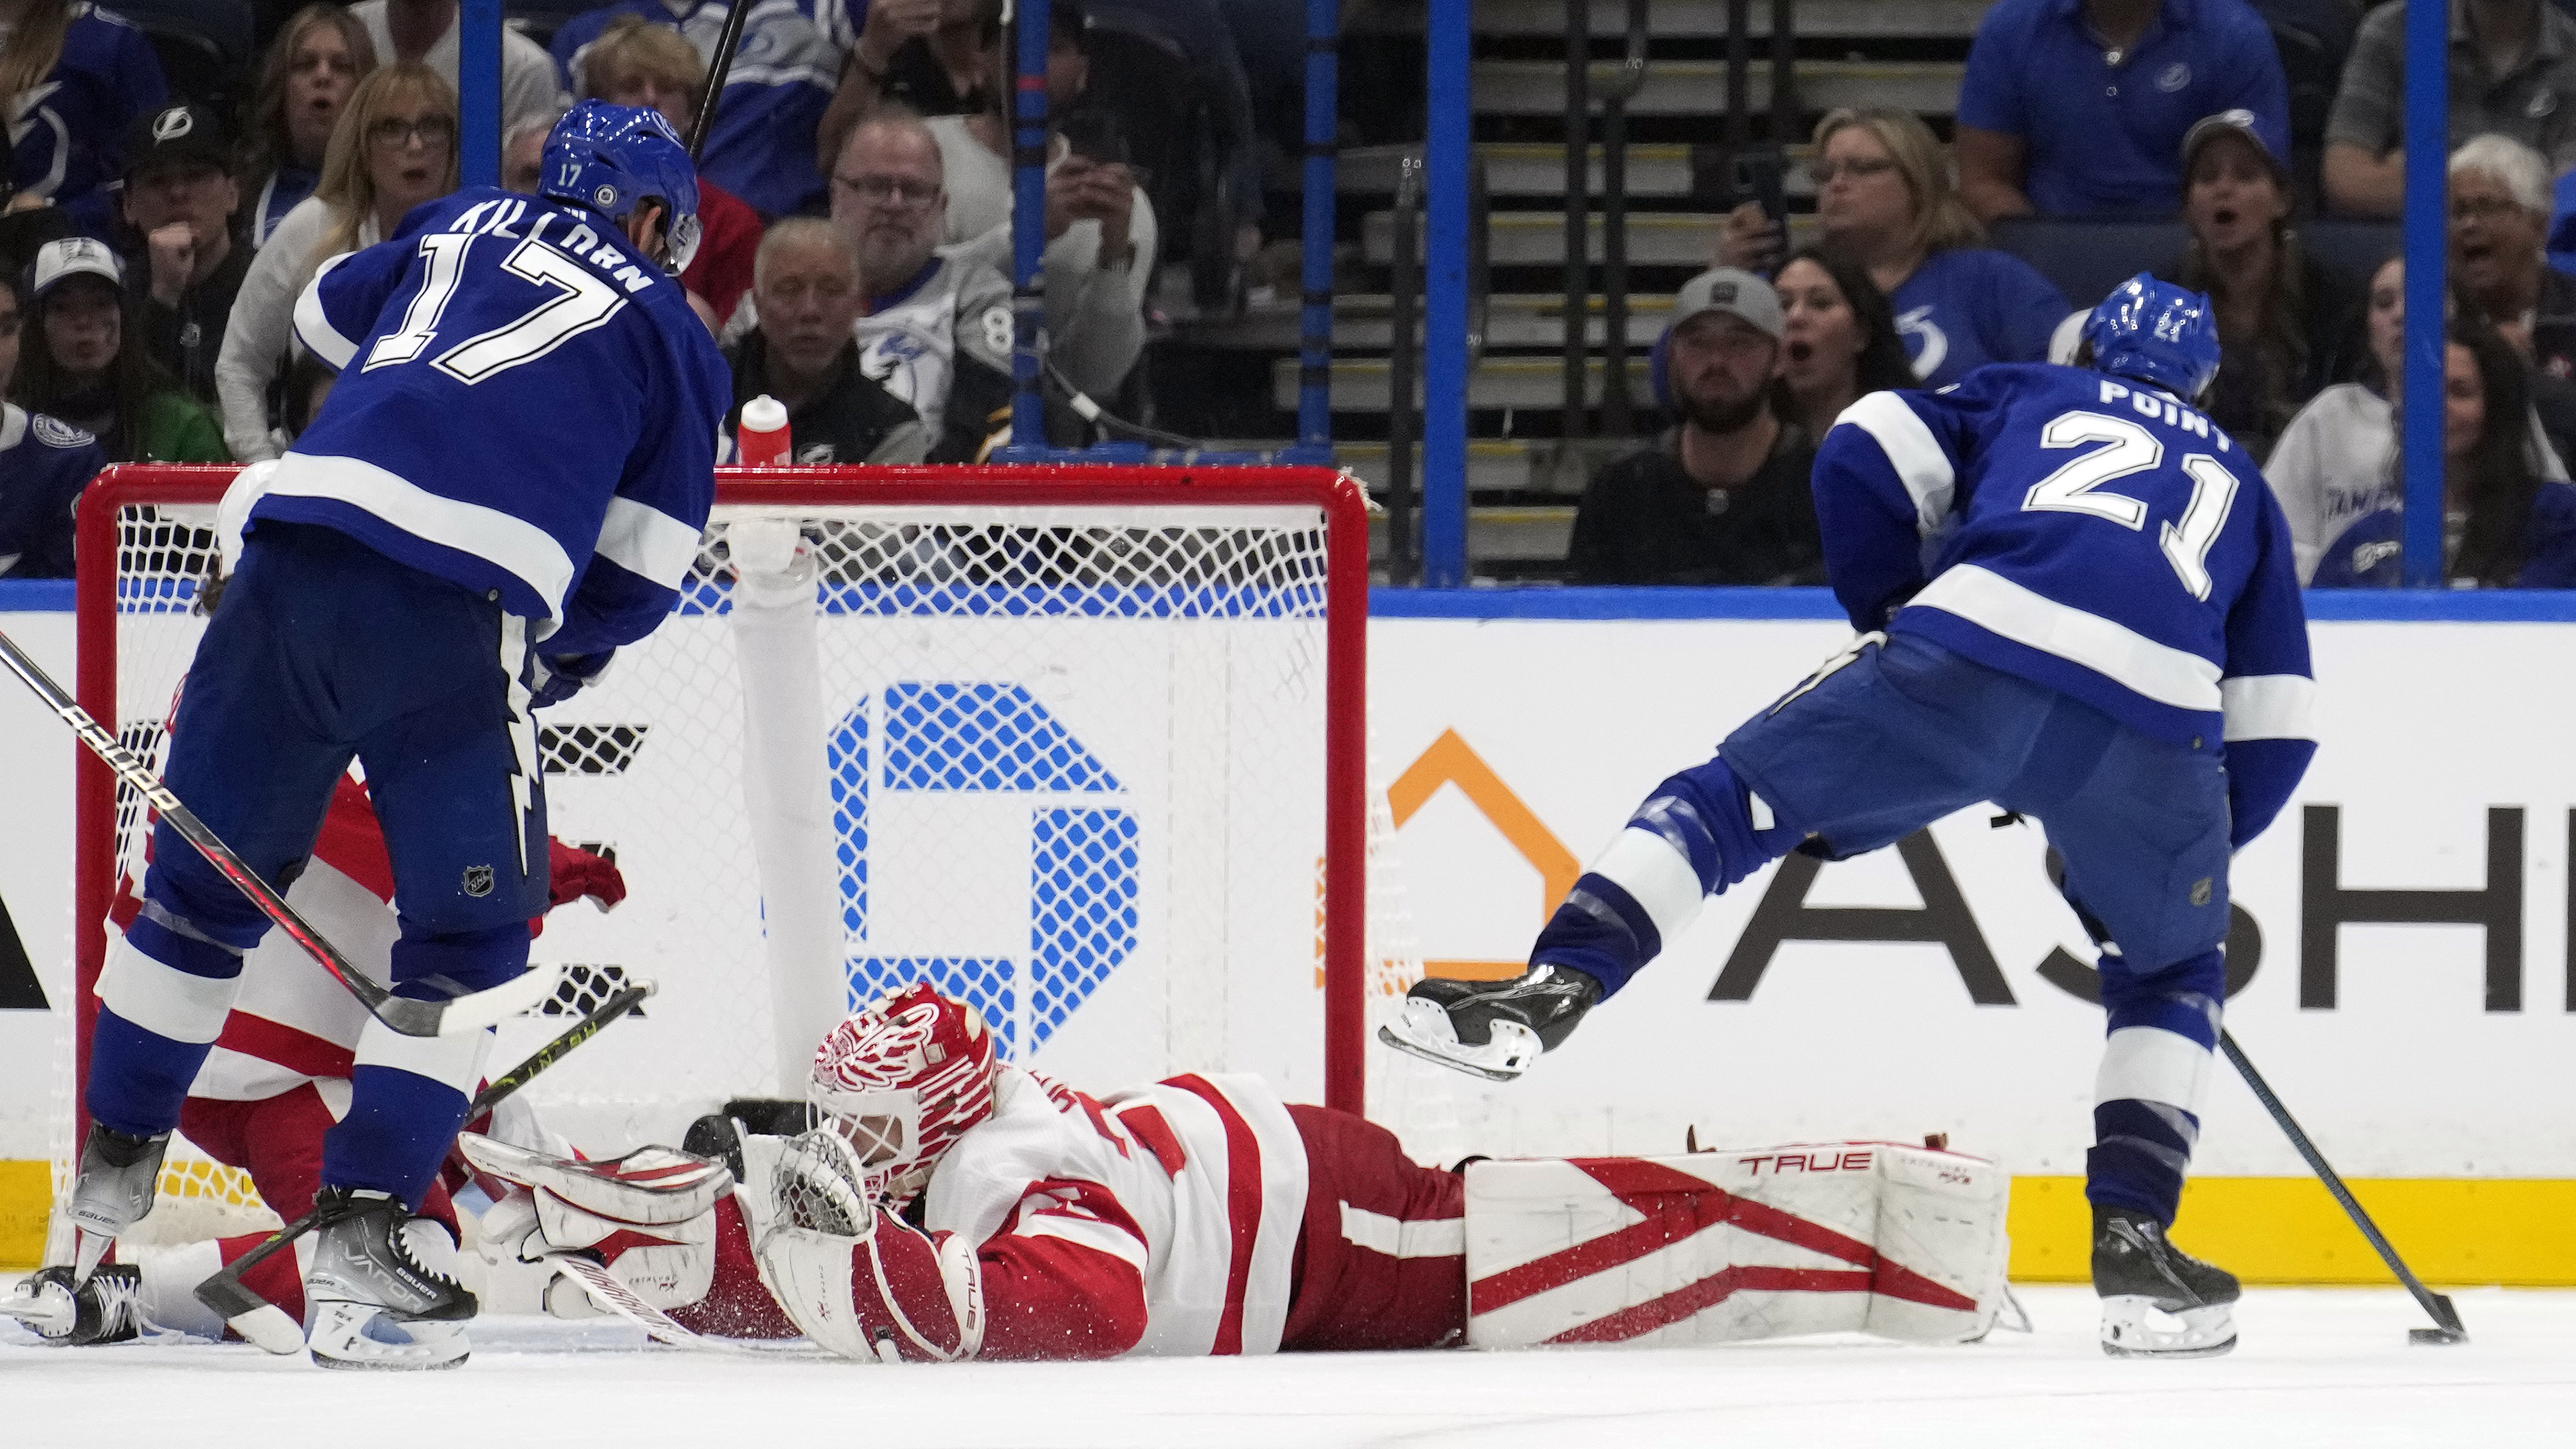 Point gets 50th, 51st goals, Lightning beat Red Wings 5-0